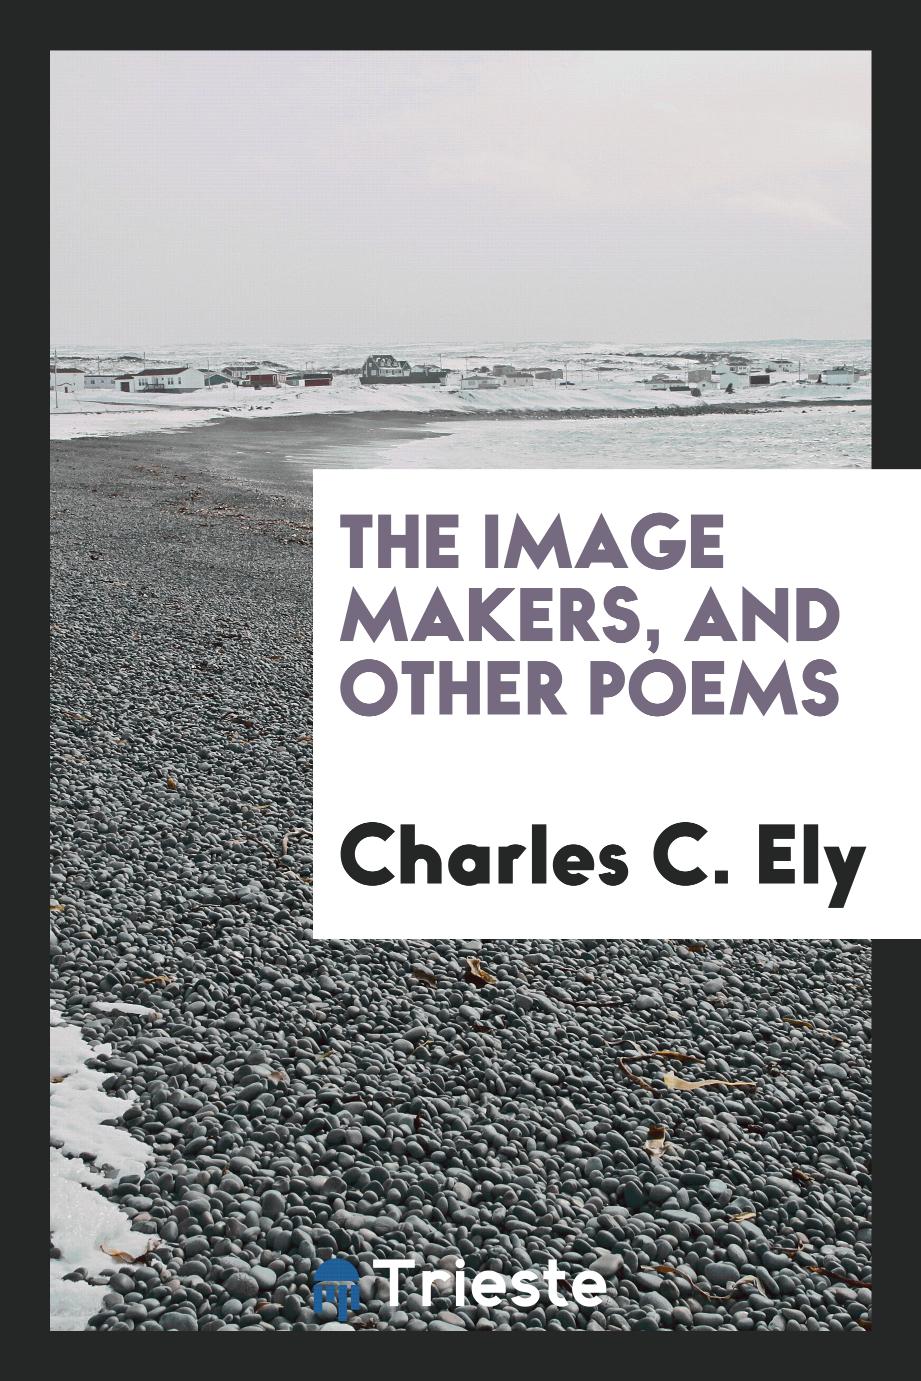 The image makers, and other poems